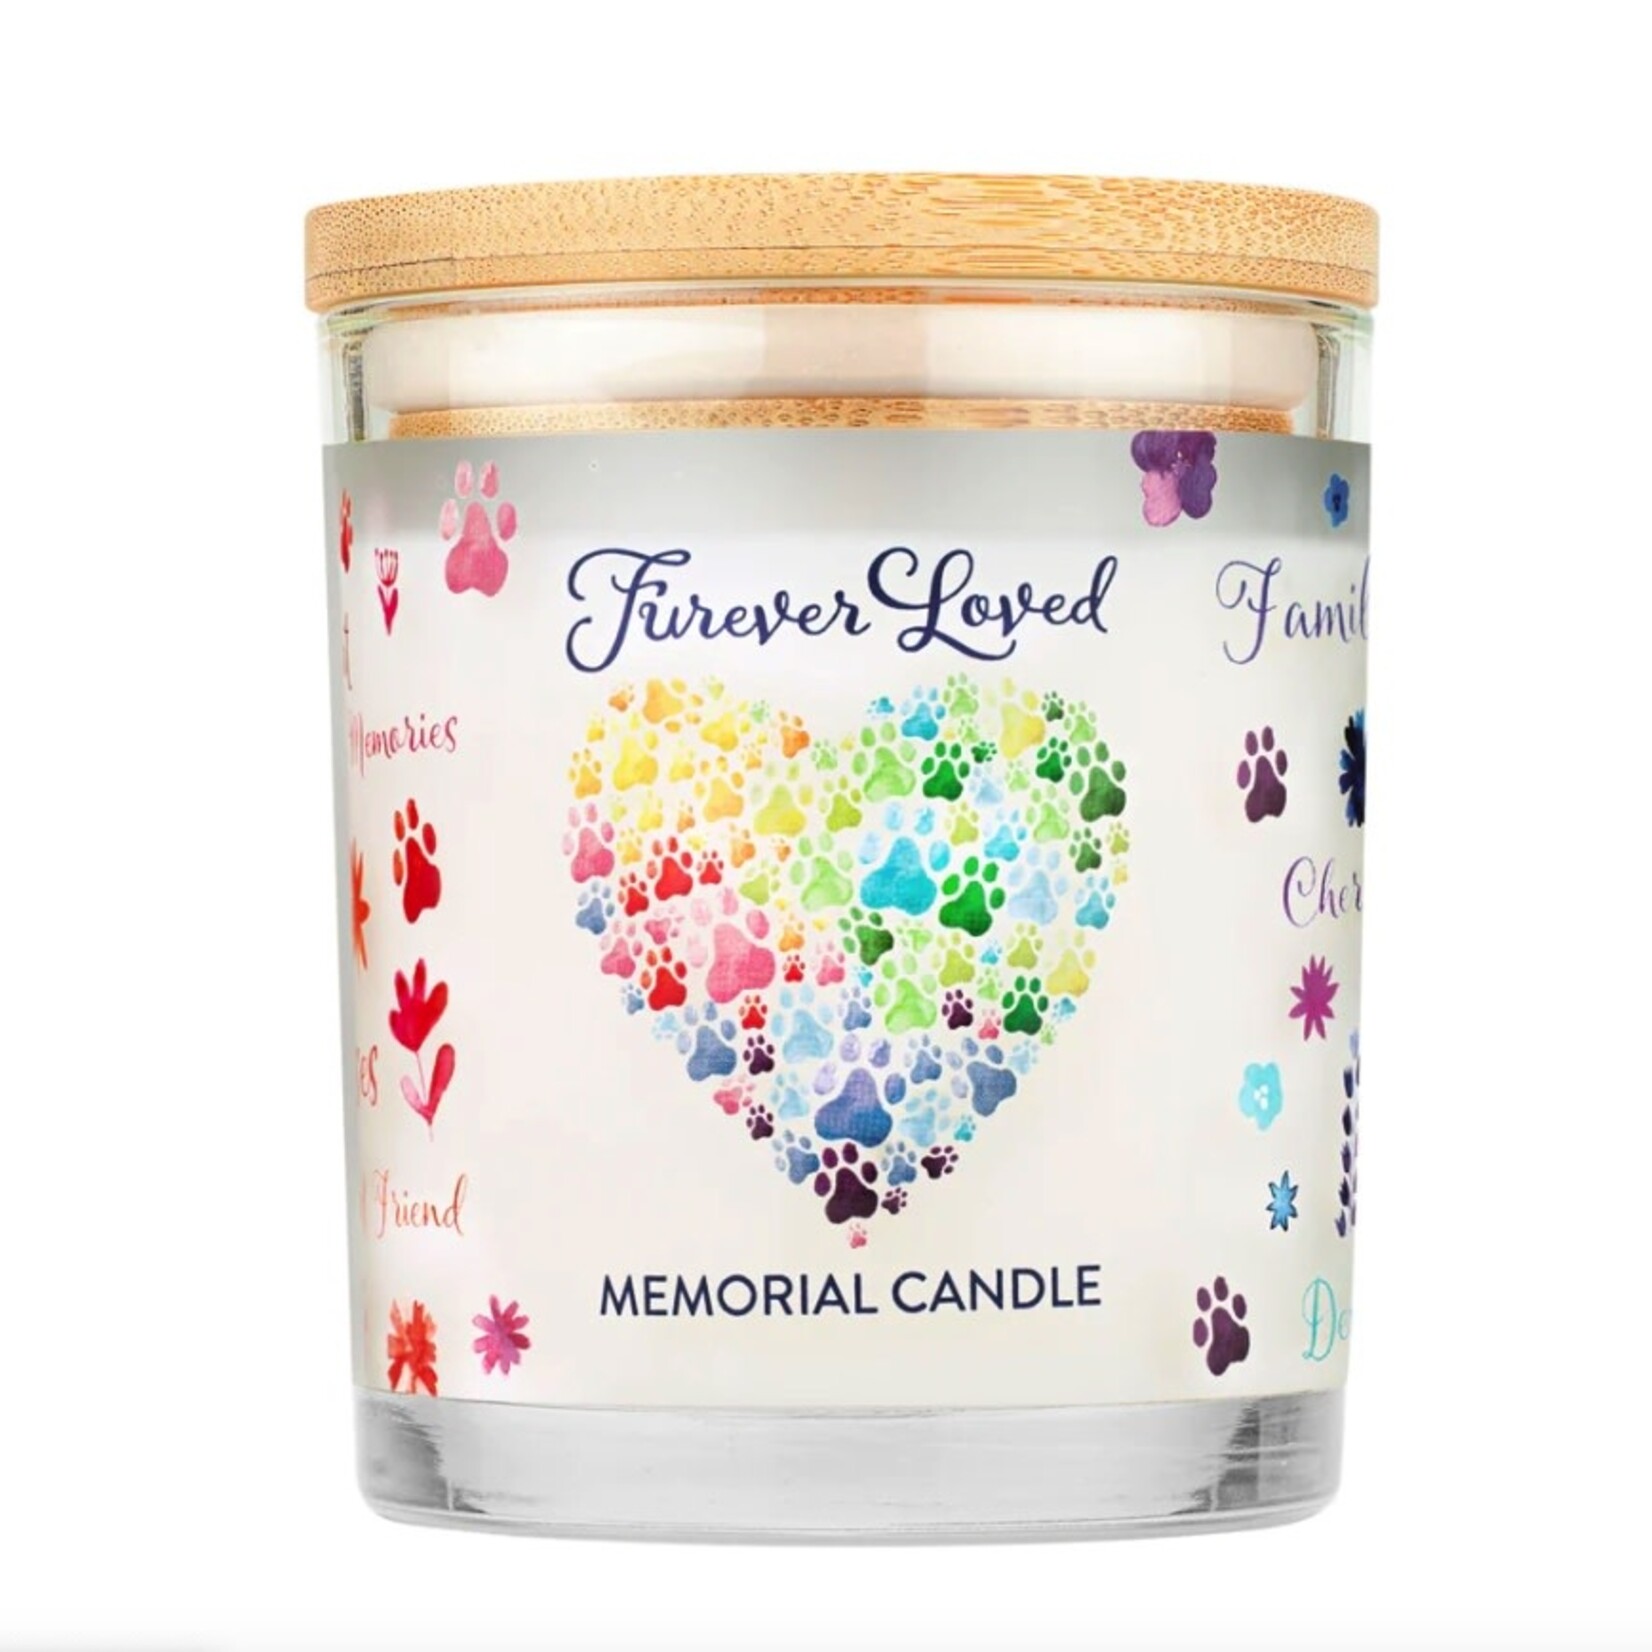 PET HOUSE CANDLE Pet House Candle Furever Loved Memorial